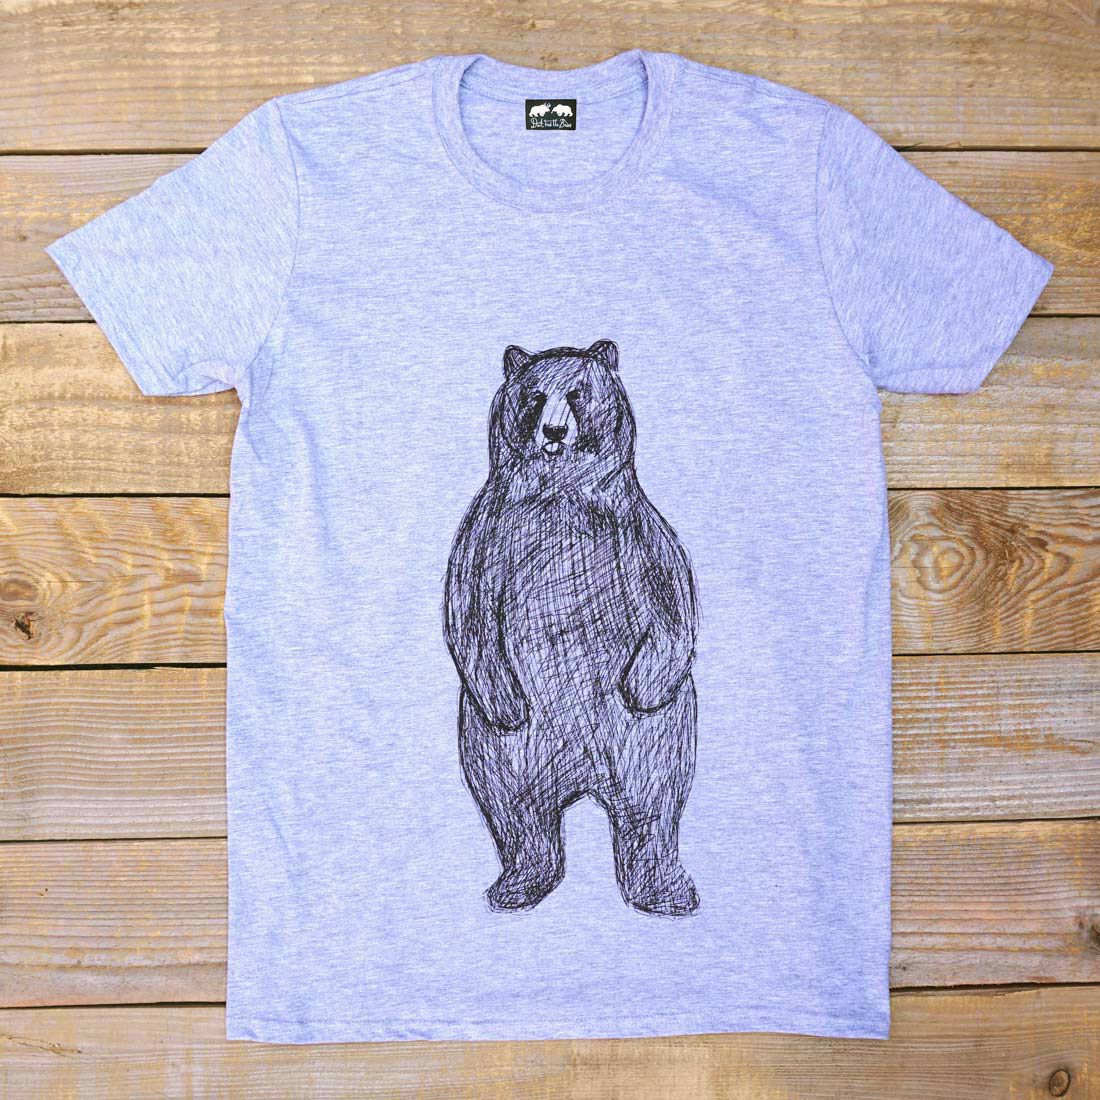 grizzly bear t-shirt